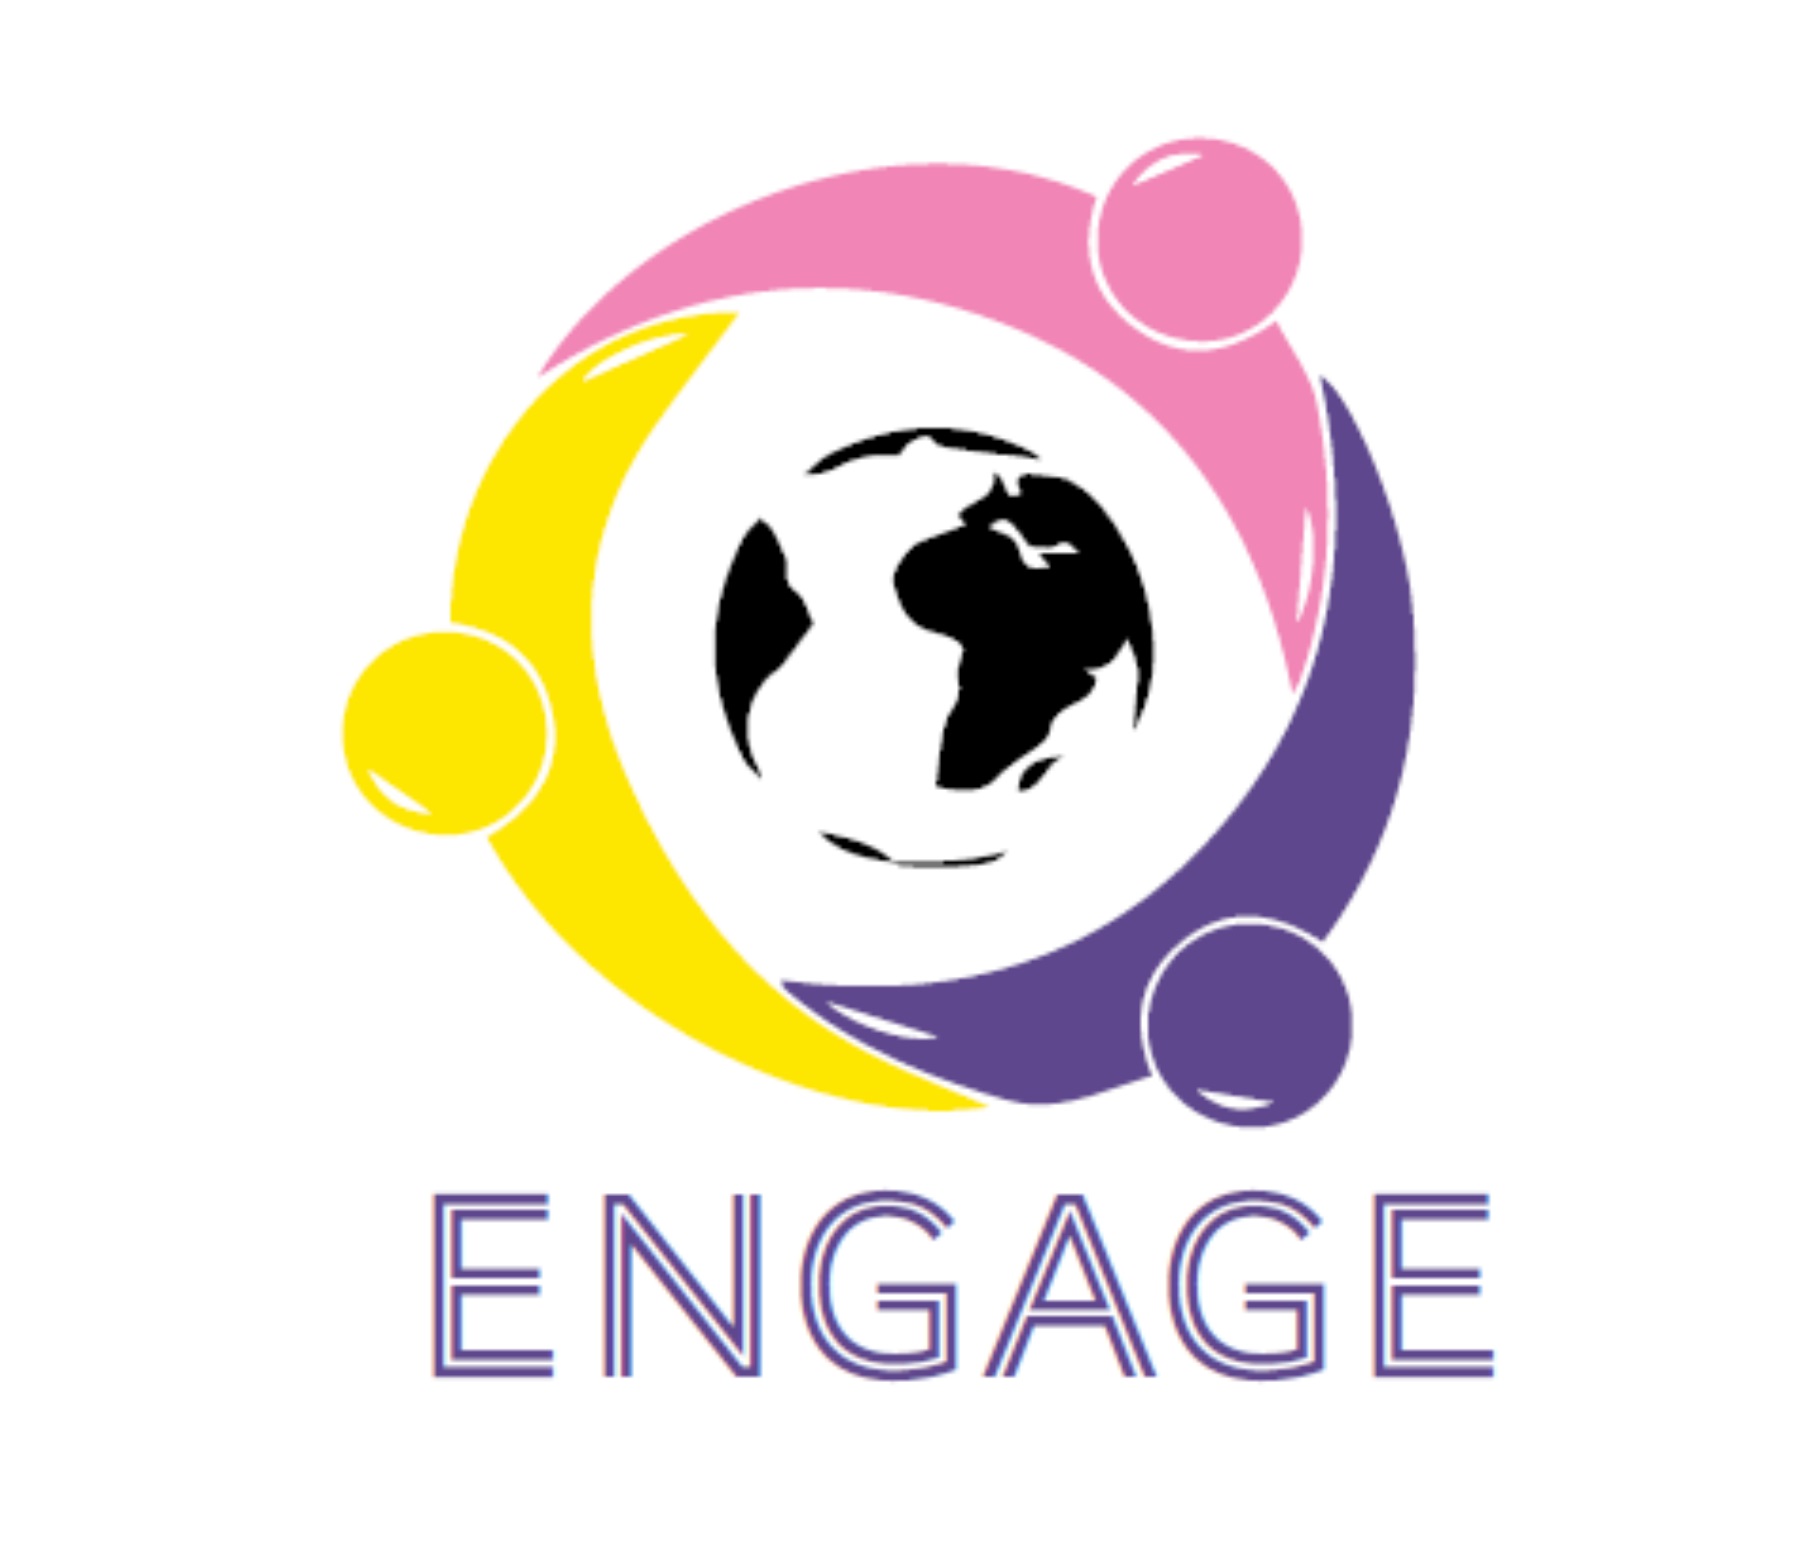 Project ENGAGE